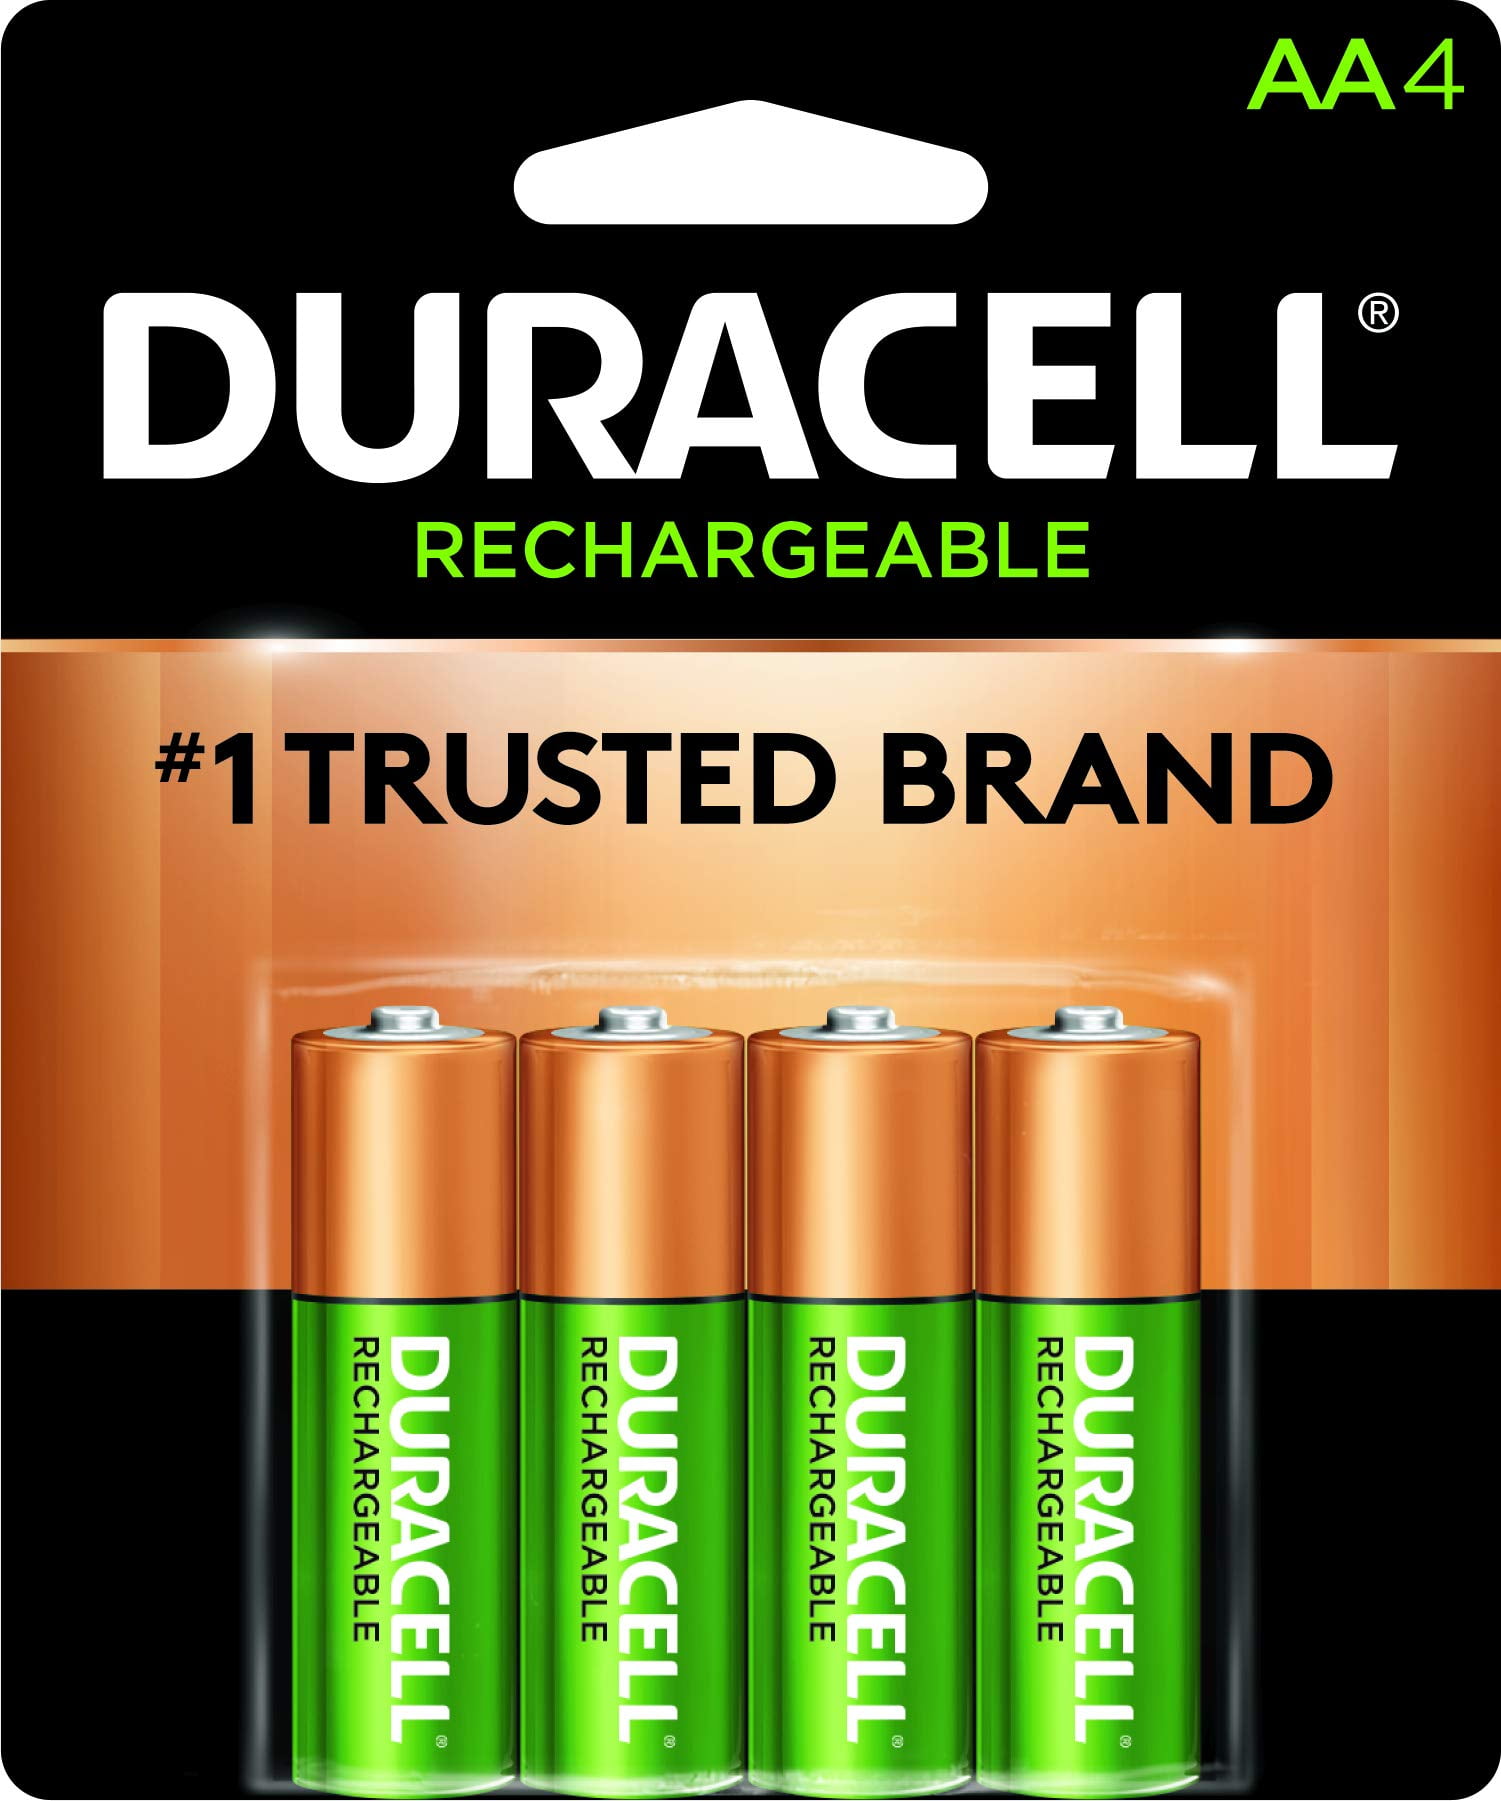 Duracell - Rechargeable AA Batteries - Long Lasting All-Purpose Double A Battery for Household and Business - 4 Count